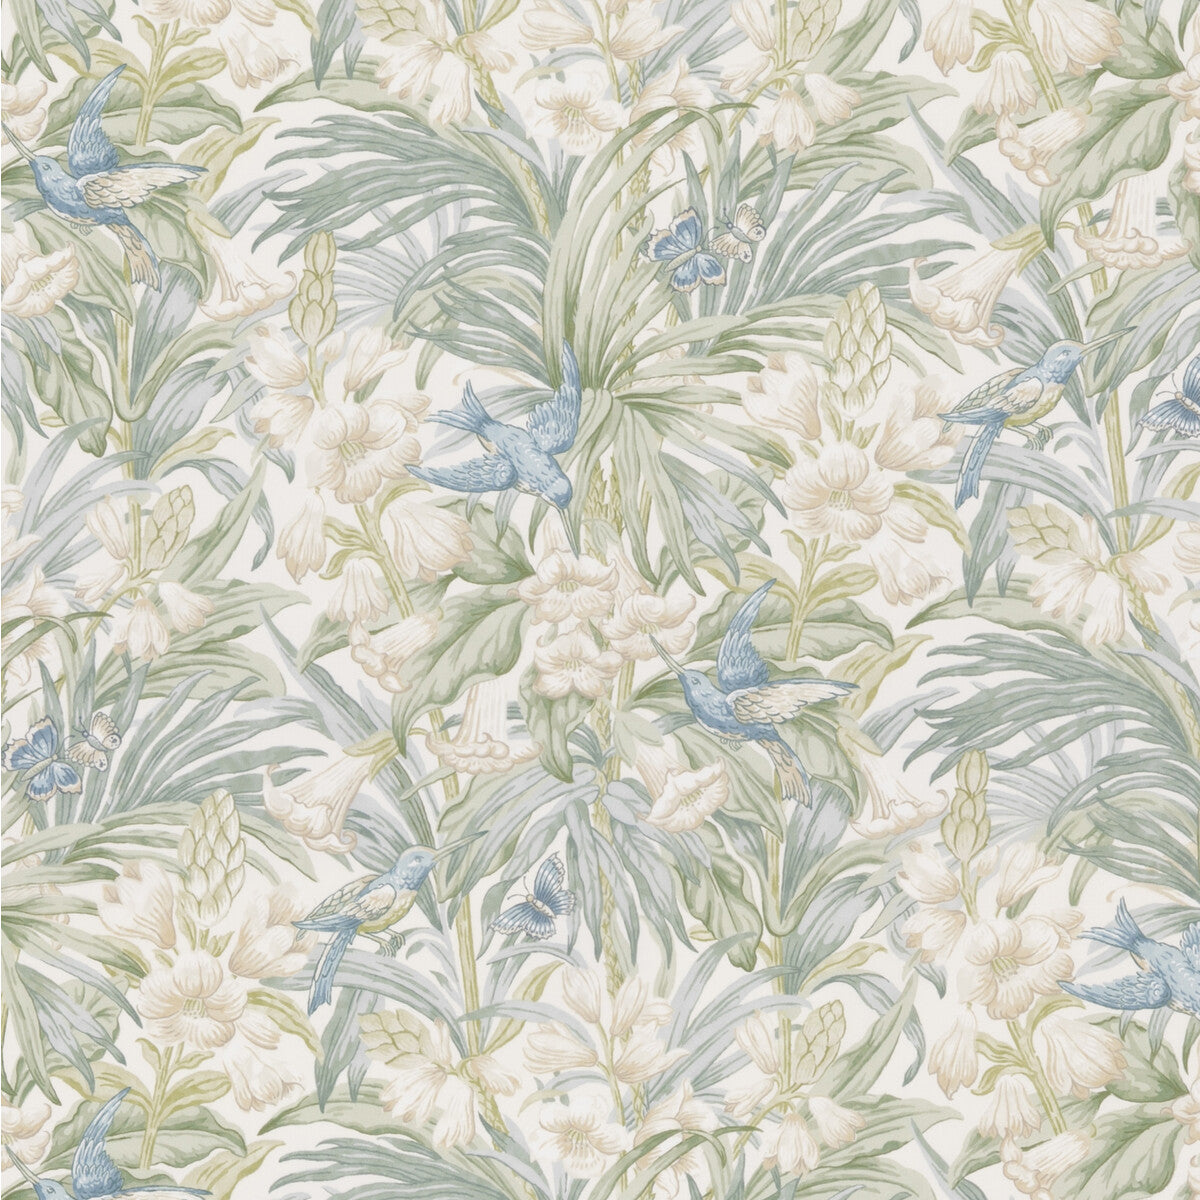 Trumpet Flowers Cotton fabric in blue/green color - pattern BP10976.3.0 - by G P &amp; J Baker in the Original Brantwood Fabric collection